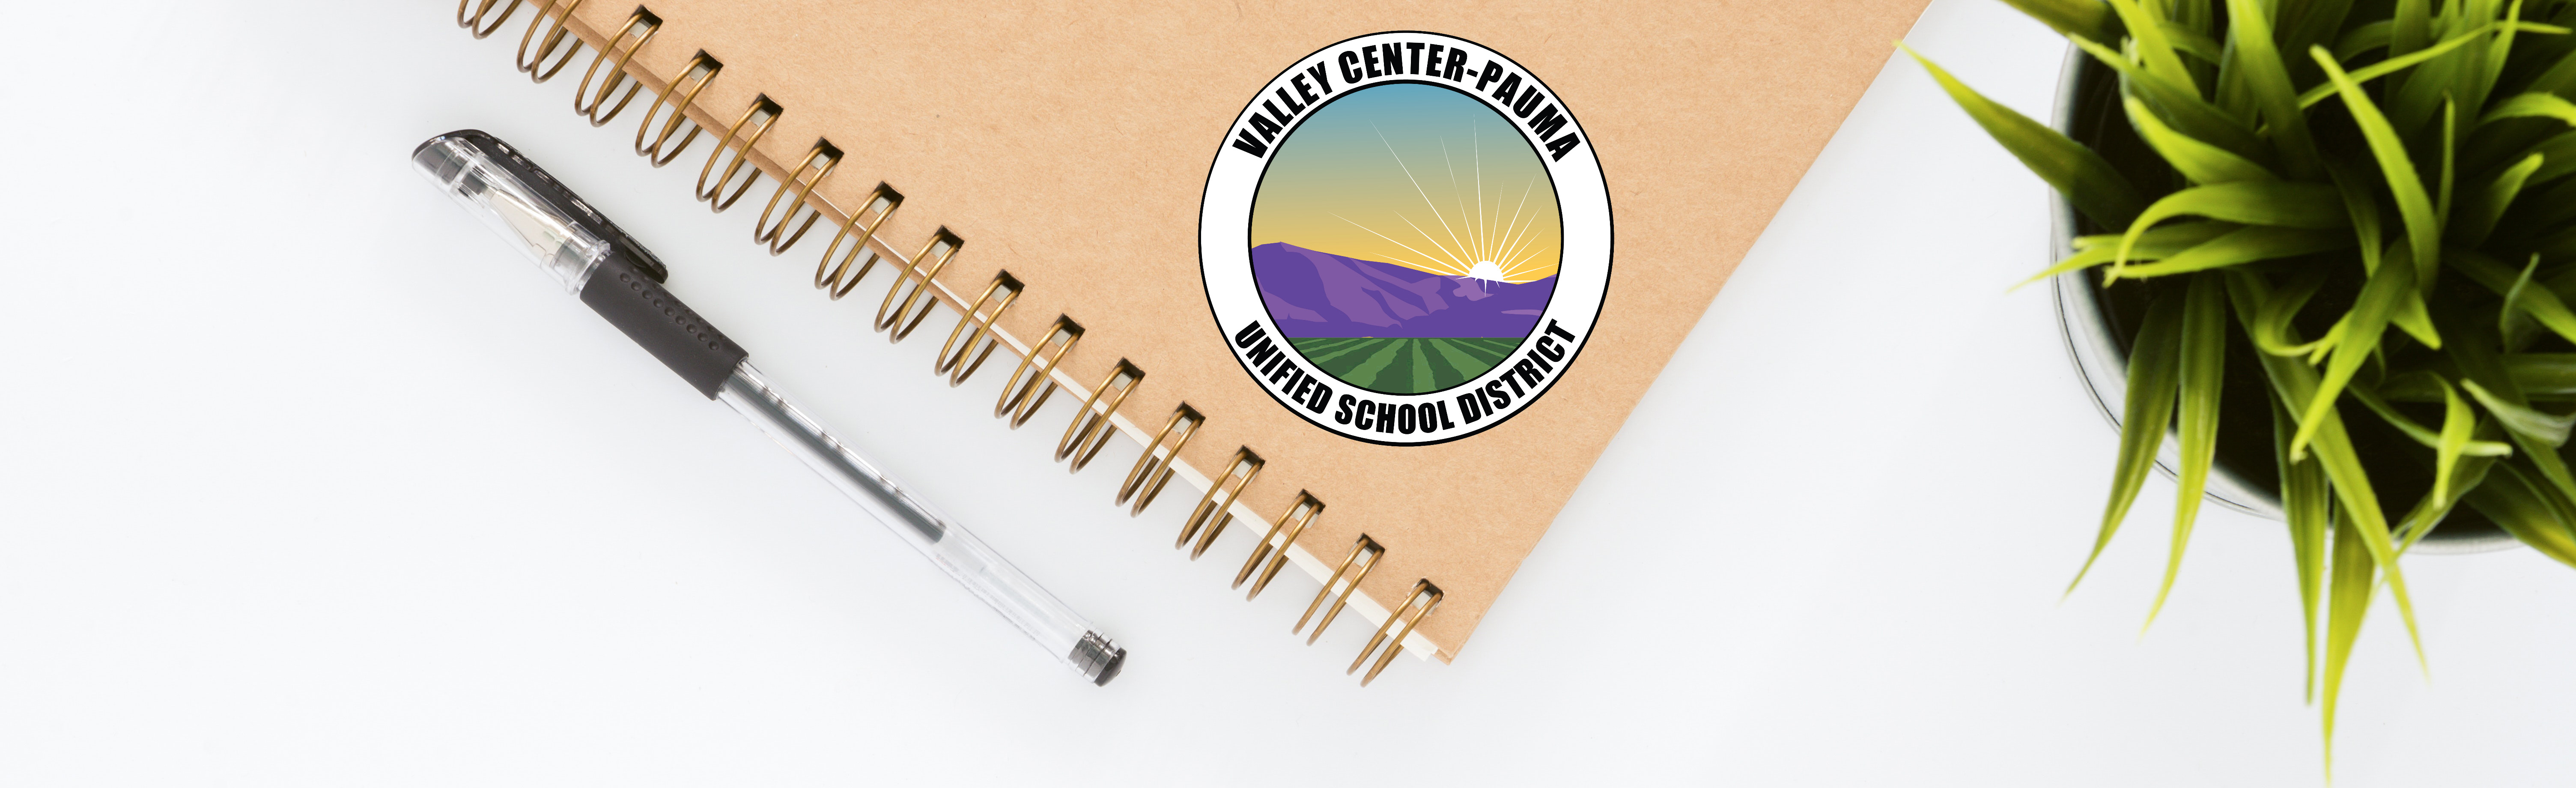 Notepad with Valley Center logo